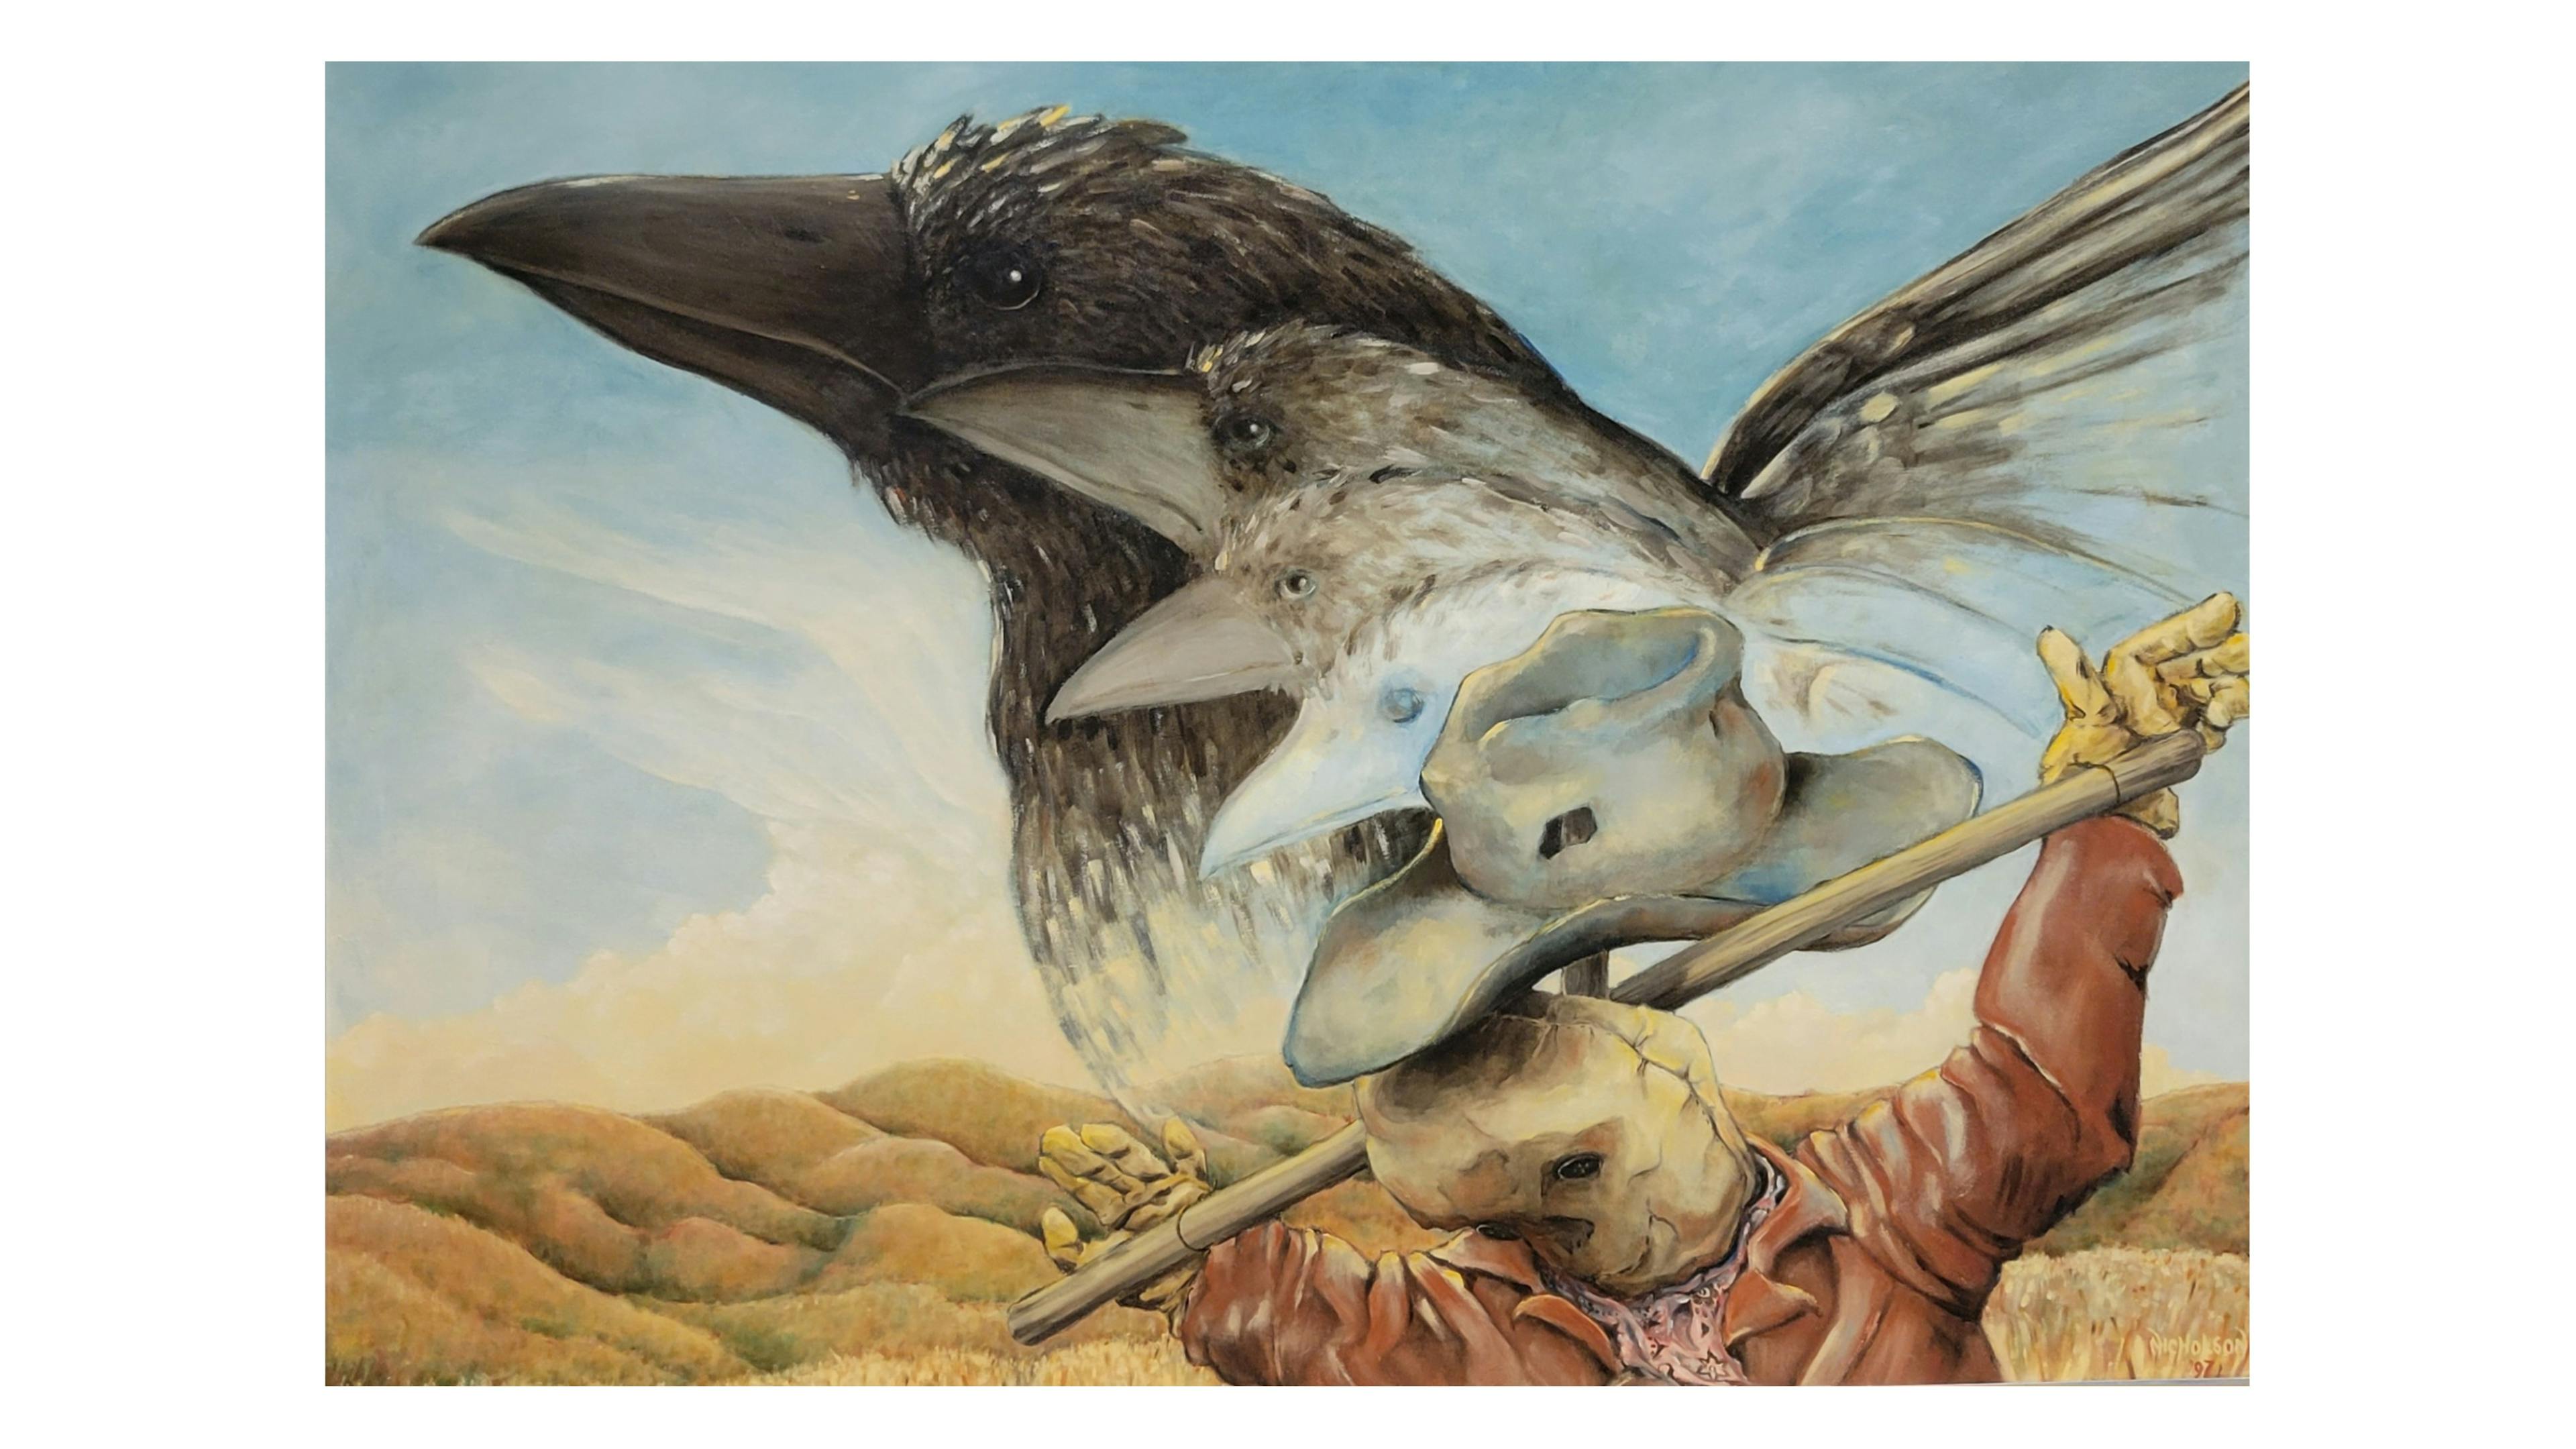 Oil painting depicting a symbolic transformation scene from 'The Wizard of Oz.' In the foreground, a lifeless scarecrow undergoes stages of metamorphosis, transitioning into a crow. The sequence progresses from a reddish-brown scarecrow to a translucent crow and finally to a fully realized black crow. The backdrop features a serene light blue sky and distant desert mountains, contributing to the scene's evocative atmosphere.